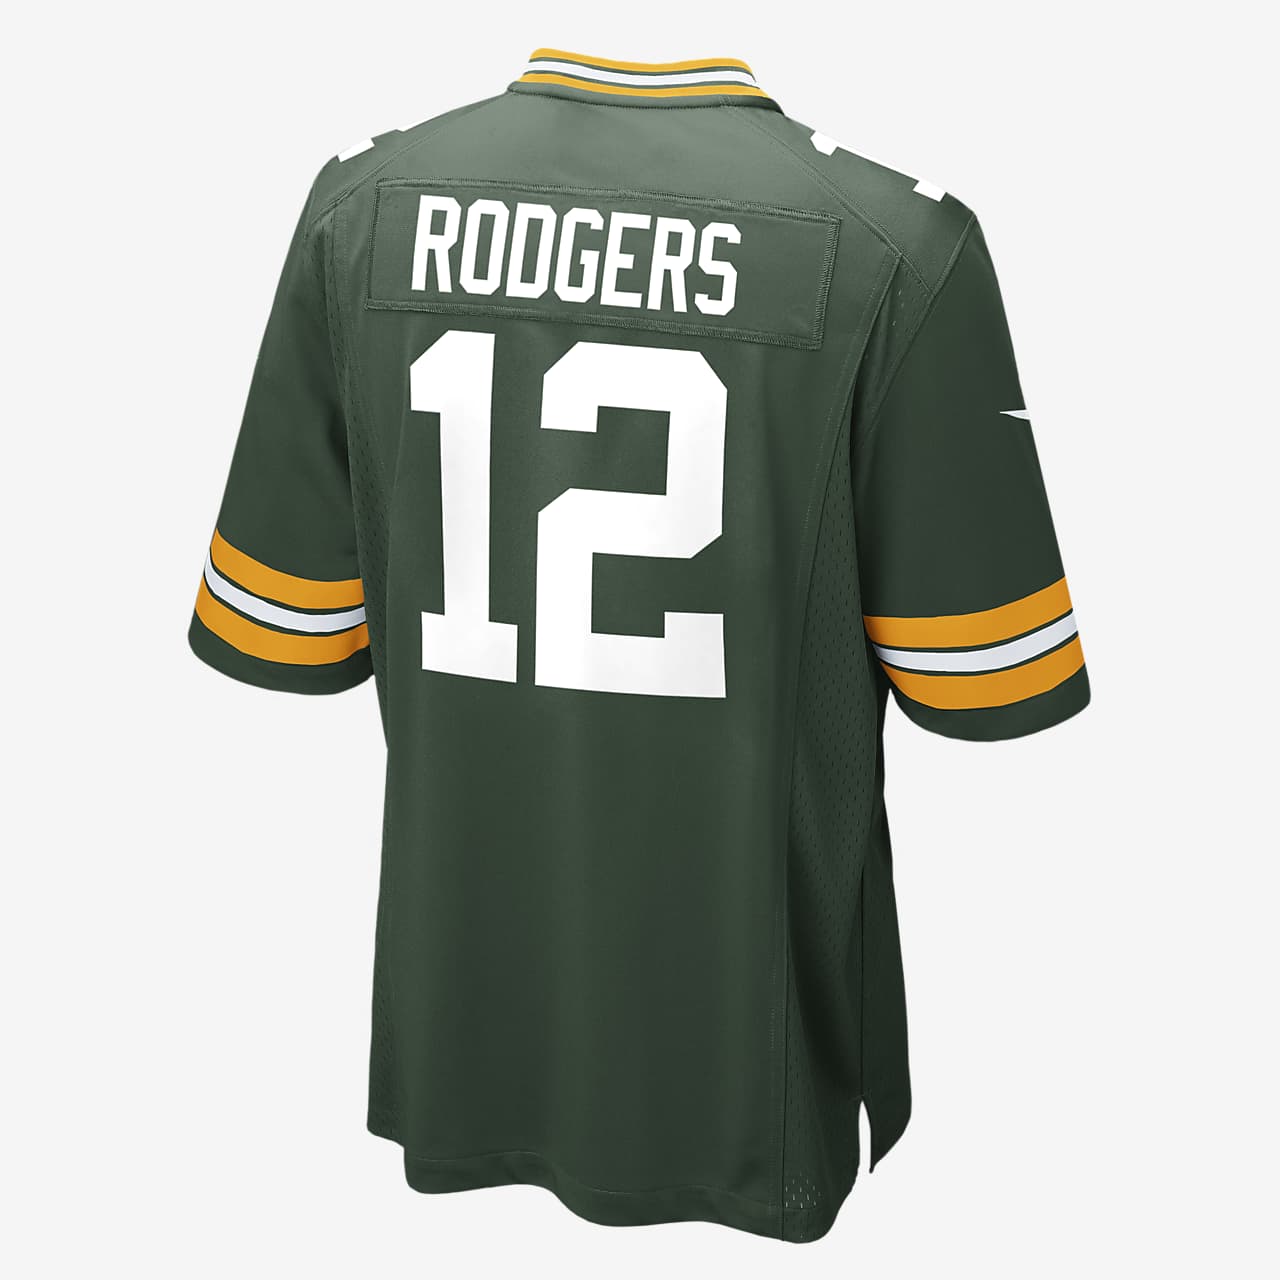 pink aaron rodgers jersey for womens